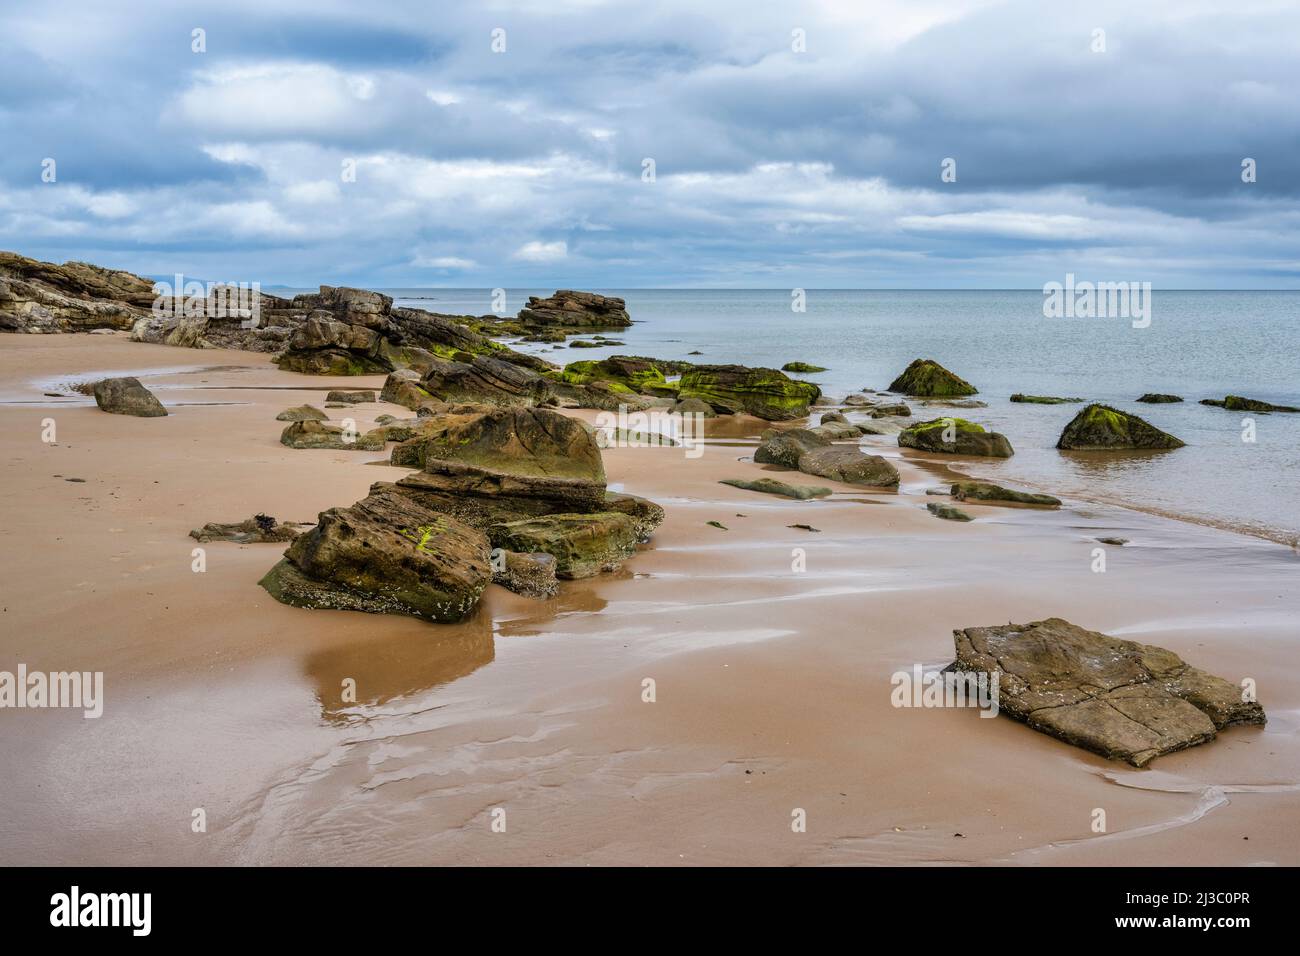 Cluster of rocks uncovered by the retreating tide on Dornoch beach in Sutherland, Highland, Scotland, UK Stock Photo